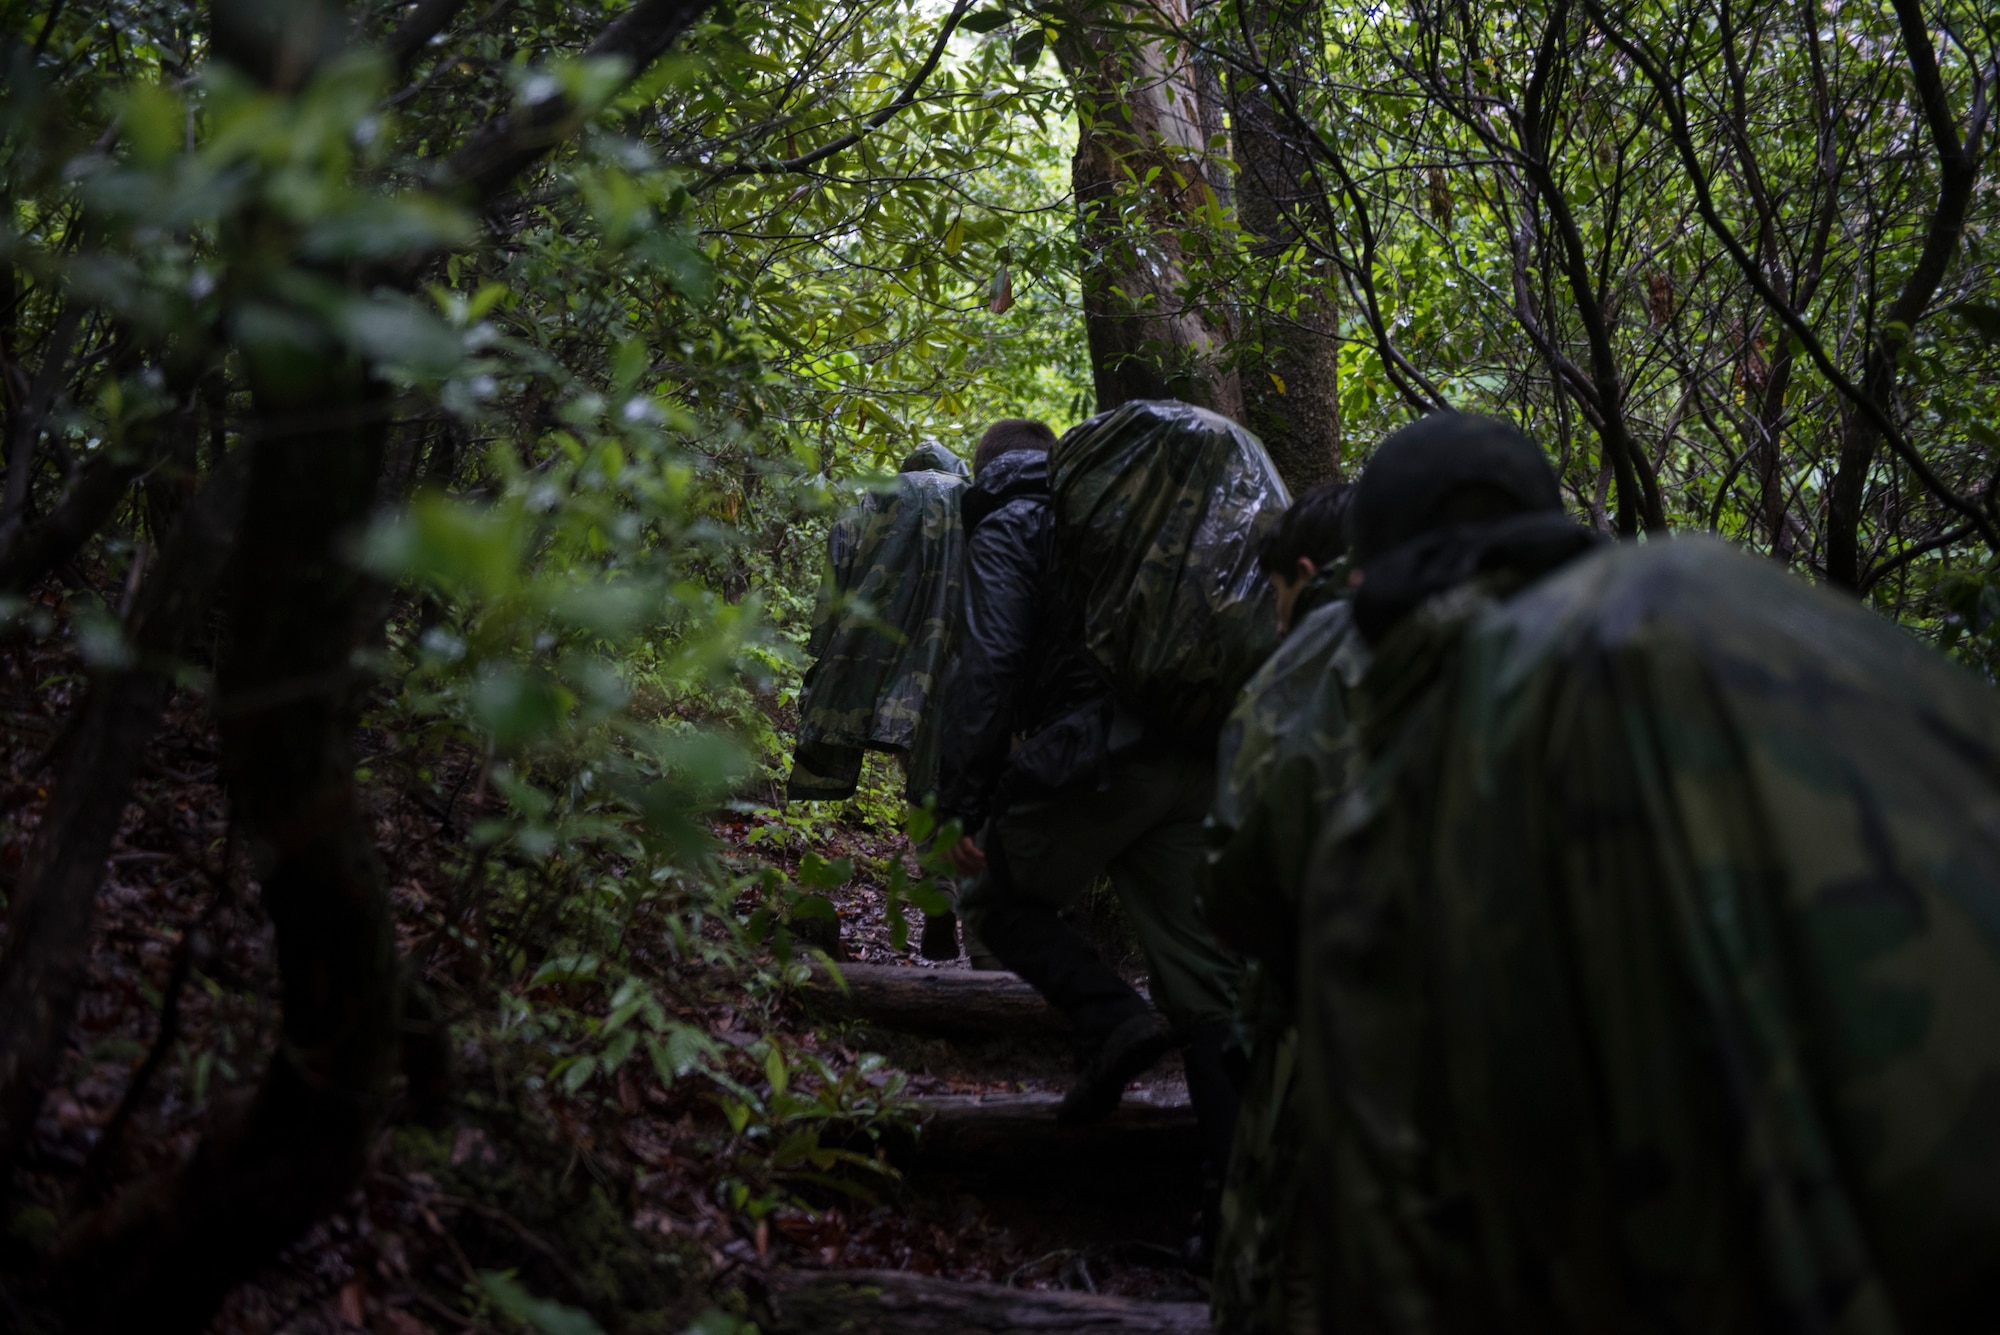 A group of Airmen from Seymour Johnson Air Force Base navigate a mountain trail, near Brevard, North Carolina, May 20, 2020. The group was taking part in combat survival training to become survival, evasion, resistance and escape augmentees. (U.S. Air Force photo by Senior Airman Kenneth Boyton)